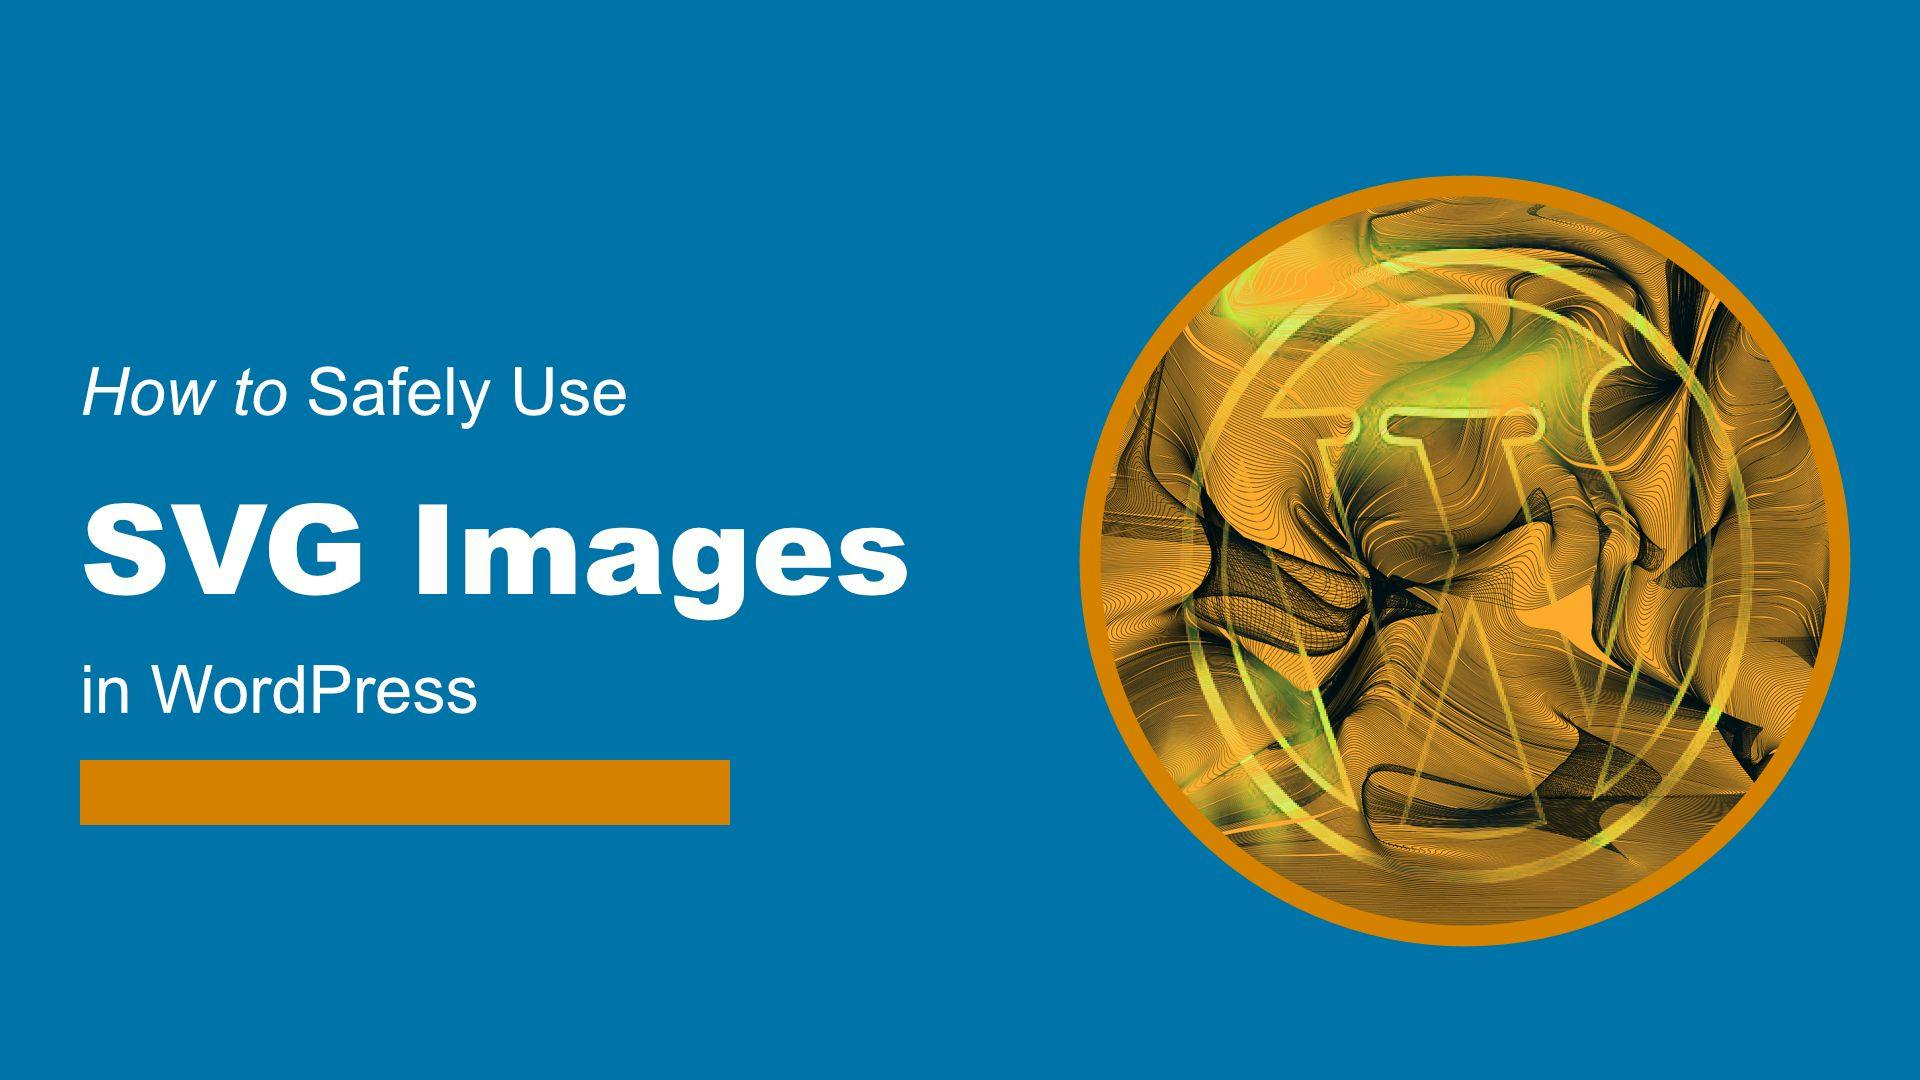 featured image - SVG: How to Use Scalable Vector Graphics in WordPress